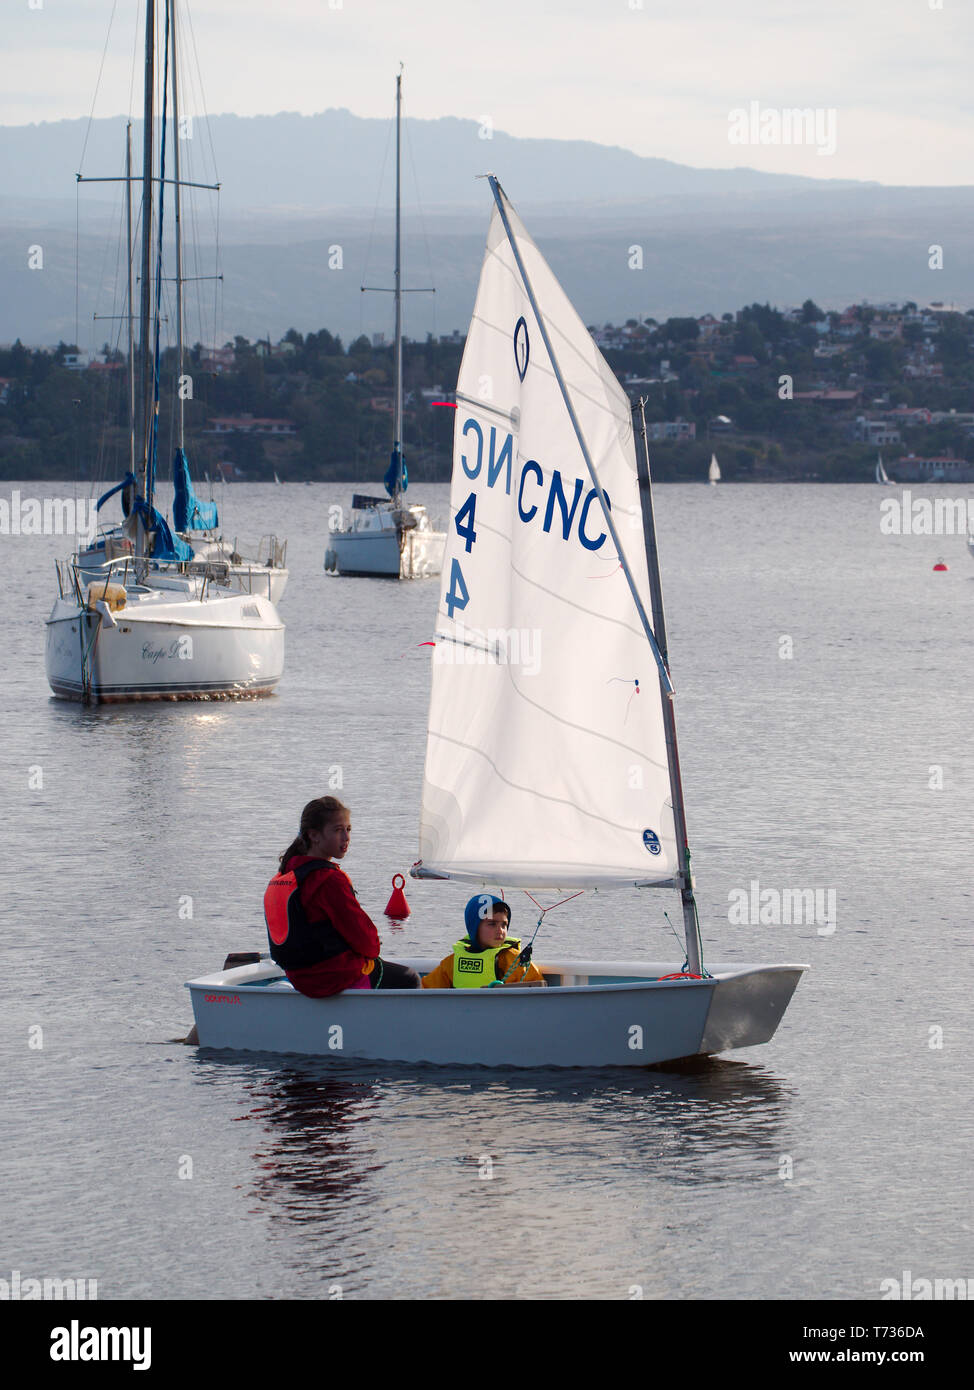 Villa Carlos Paz, Cordoba, Argentina - 2019: Children ride a sailboat at San Roque Lake, one of the main attractions of this touristic city. Stock Photo